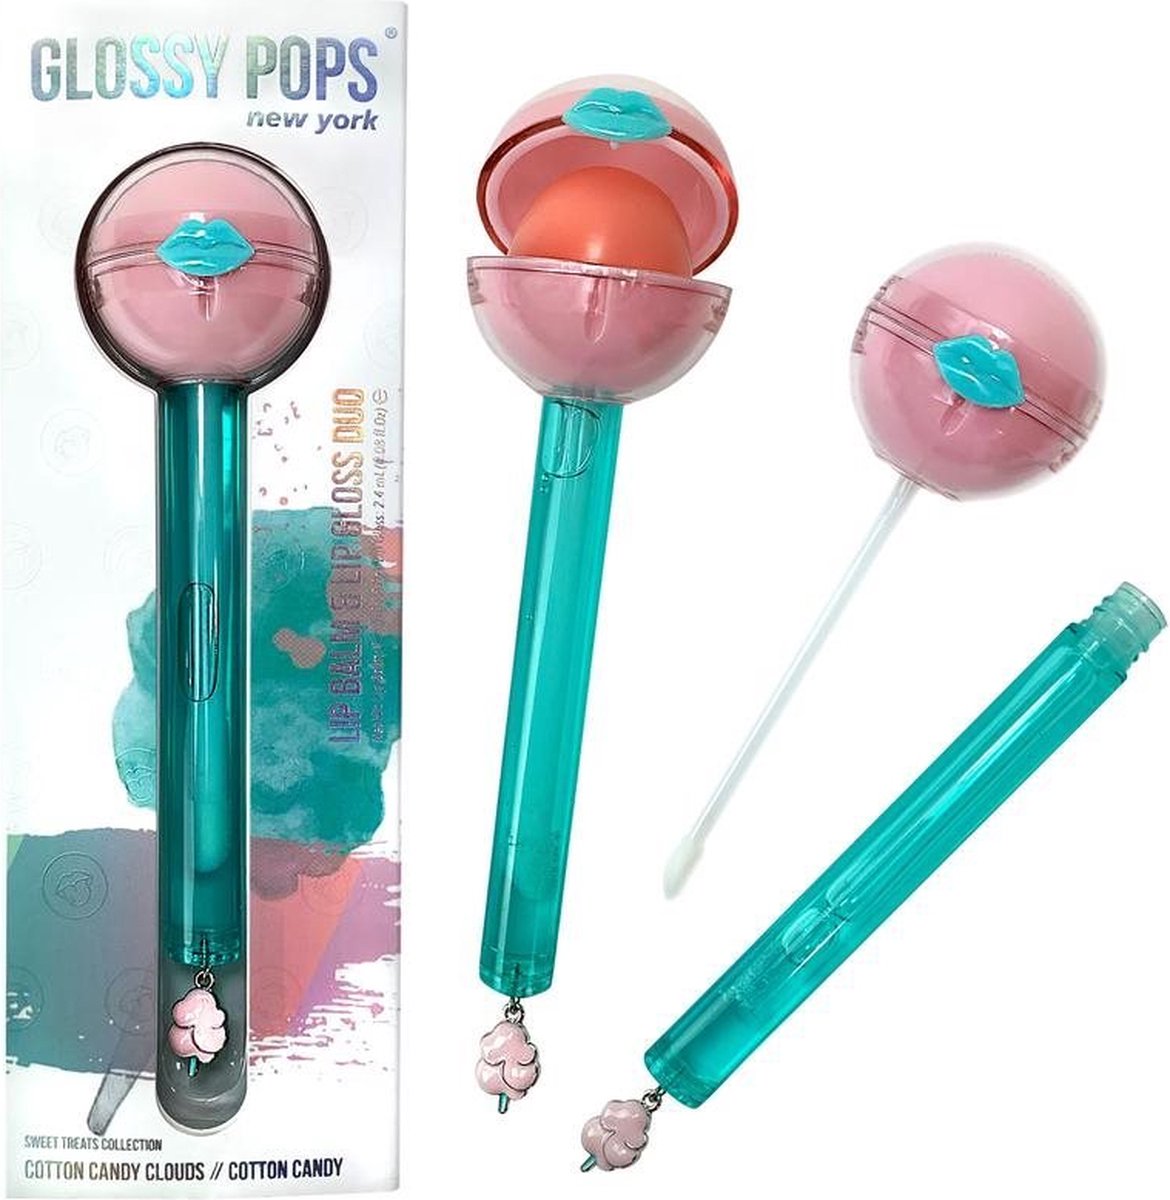 Glossy Pops Sweet Treats Collection - Lipgloss / Lippenbalsem - Cotton Candy Clouds